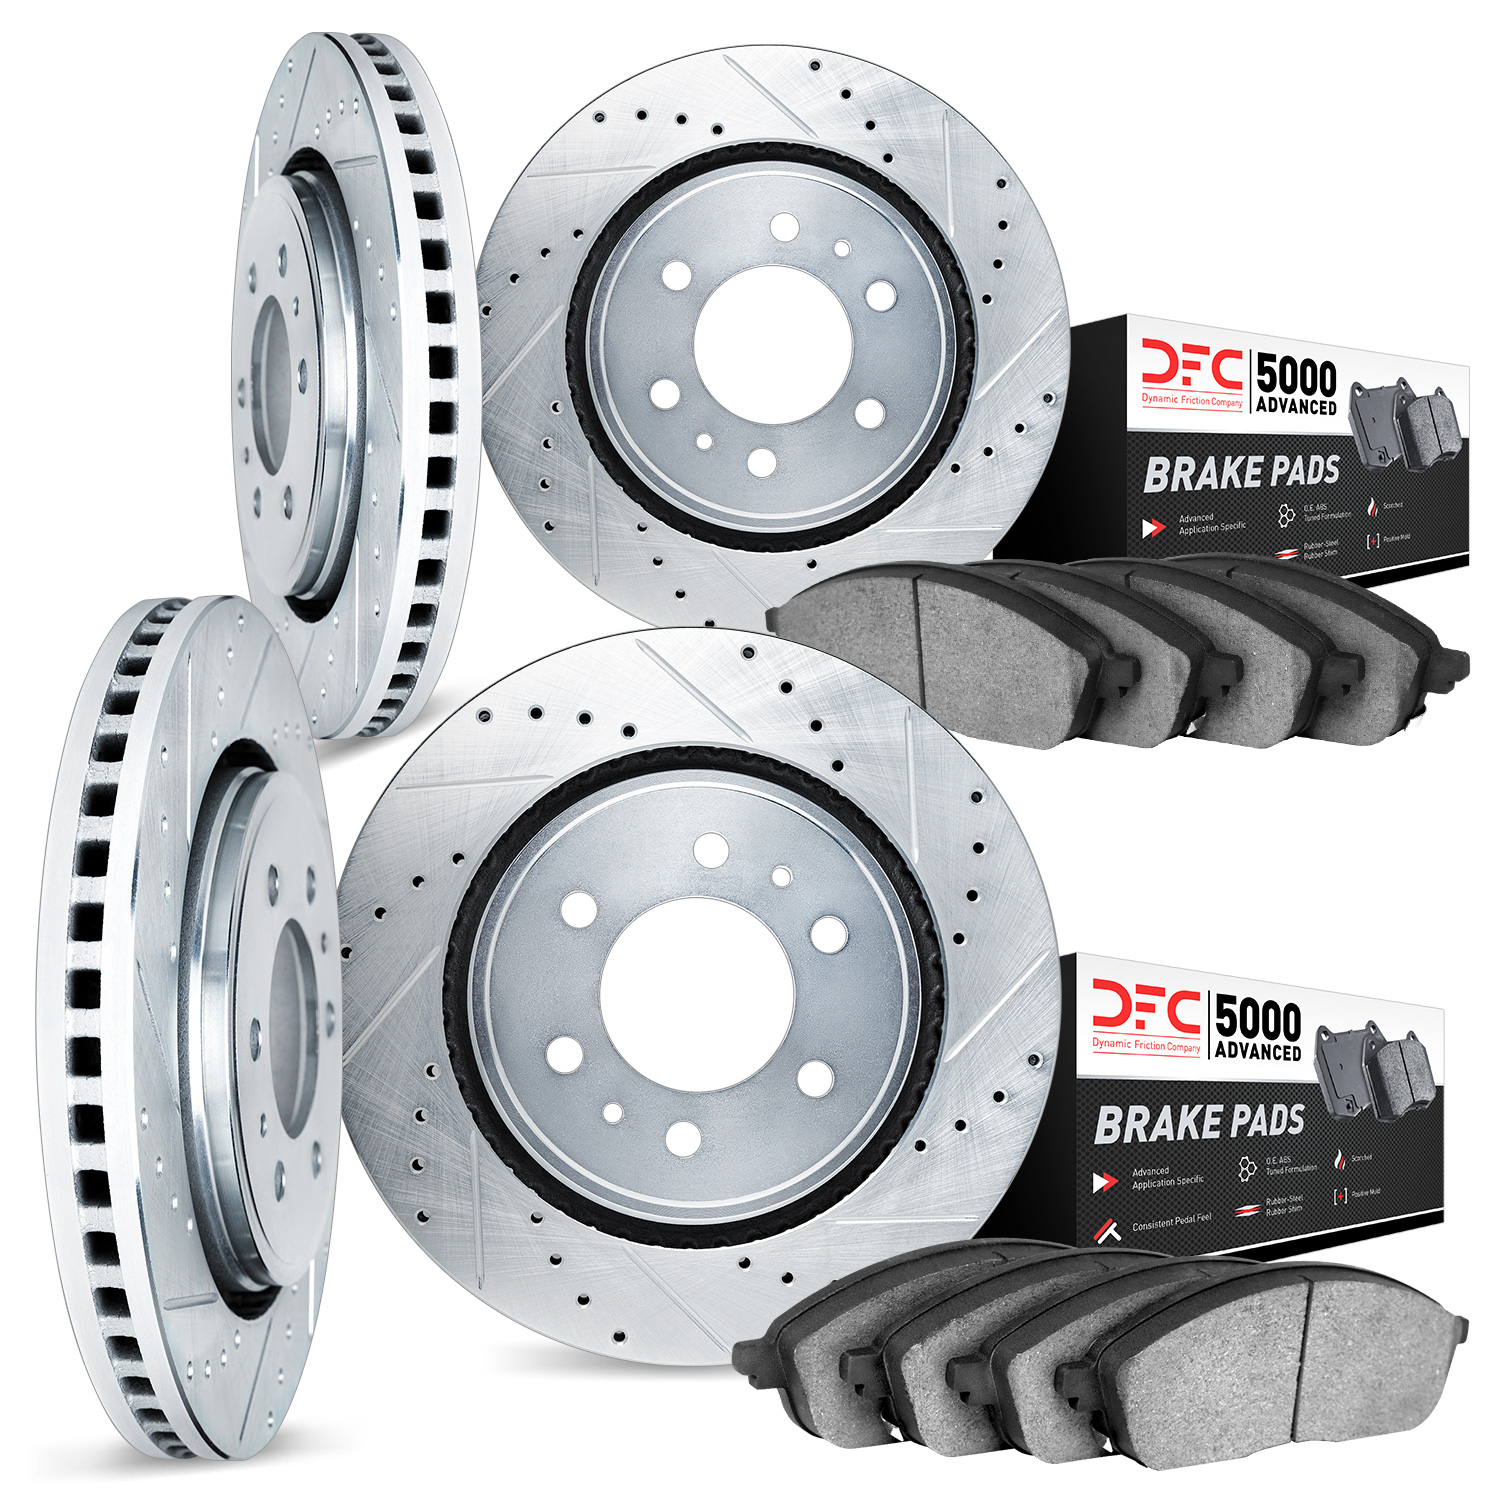 7504-48036 Drilled/Slotted Brake Rotors w/5000 Advanced Brake Pads Kit [Silver], 2002-2005 GM, Position: Front and Rear